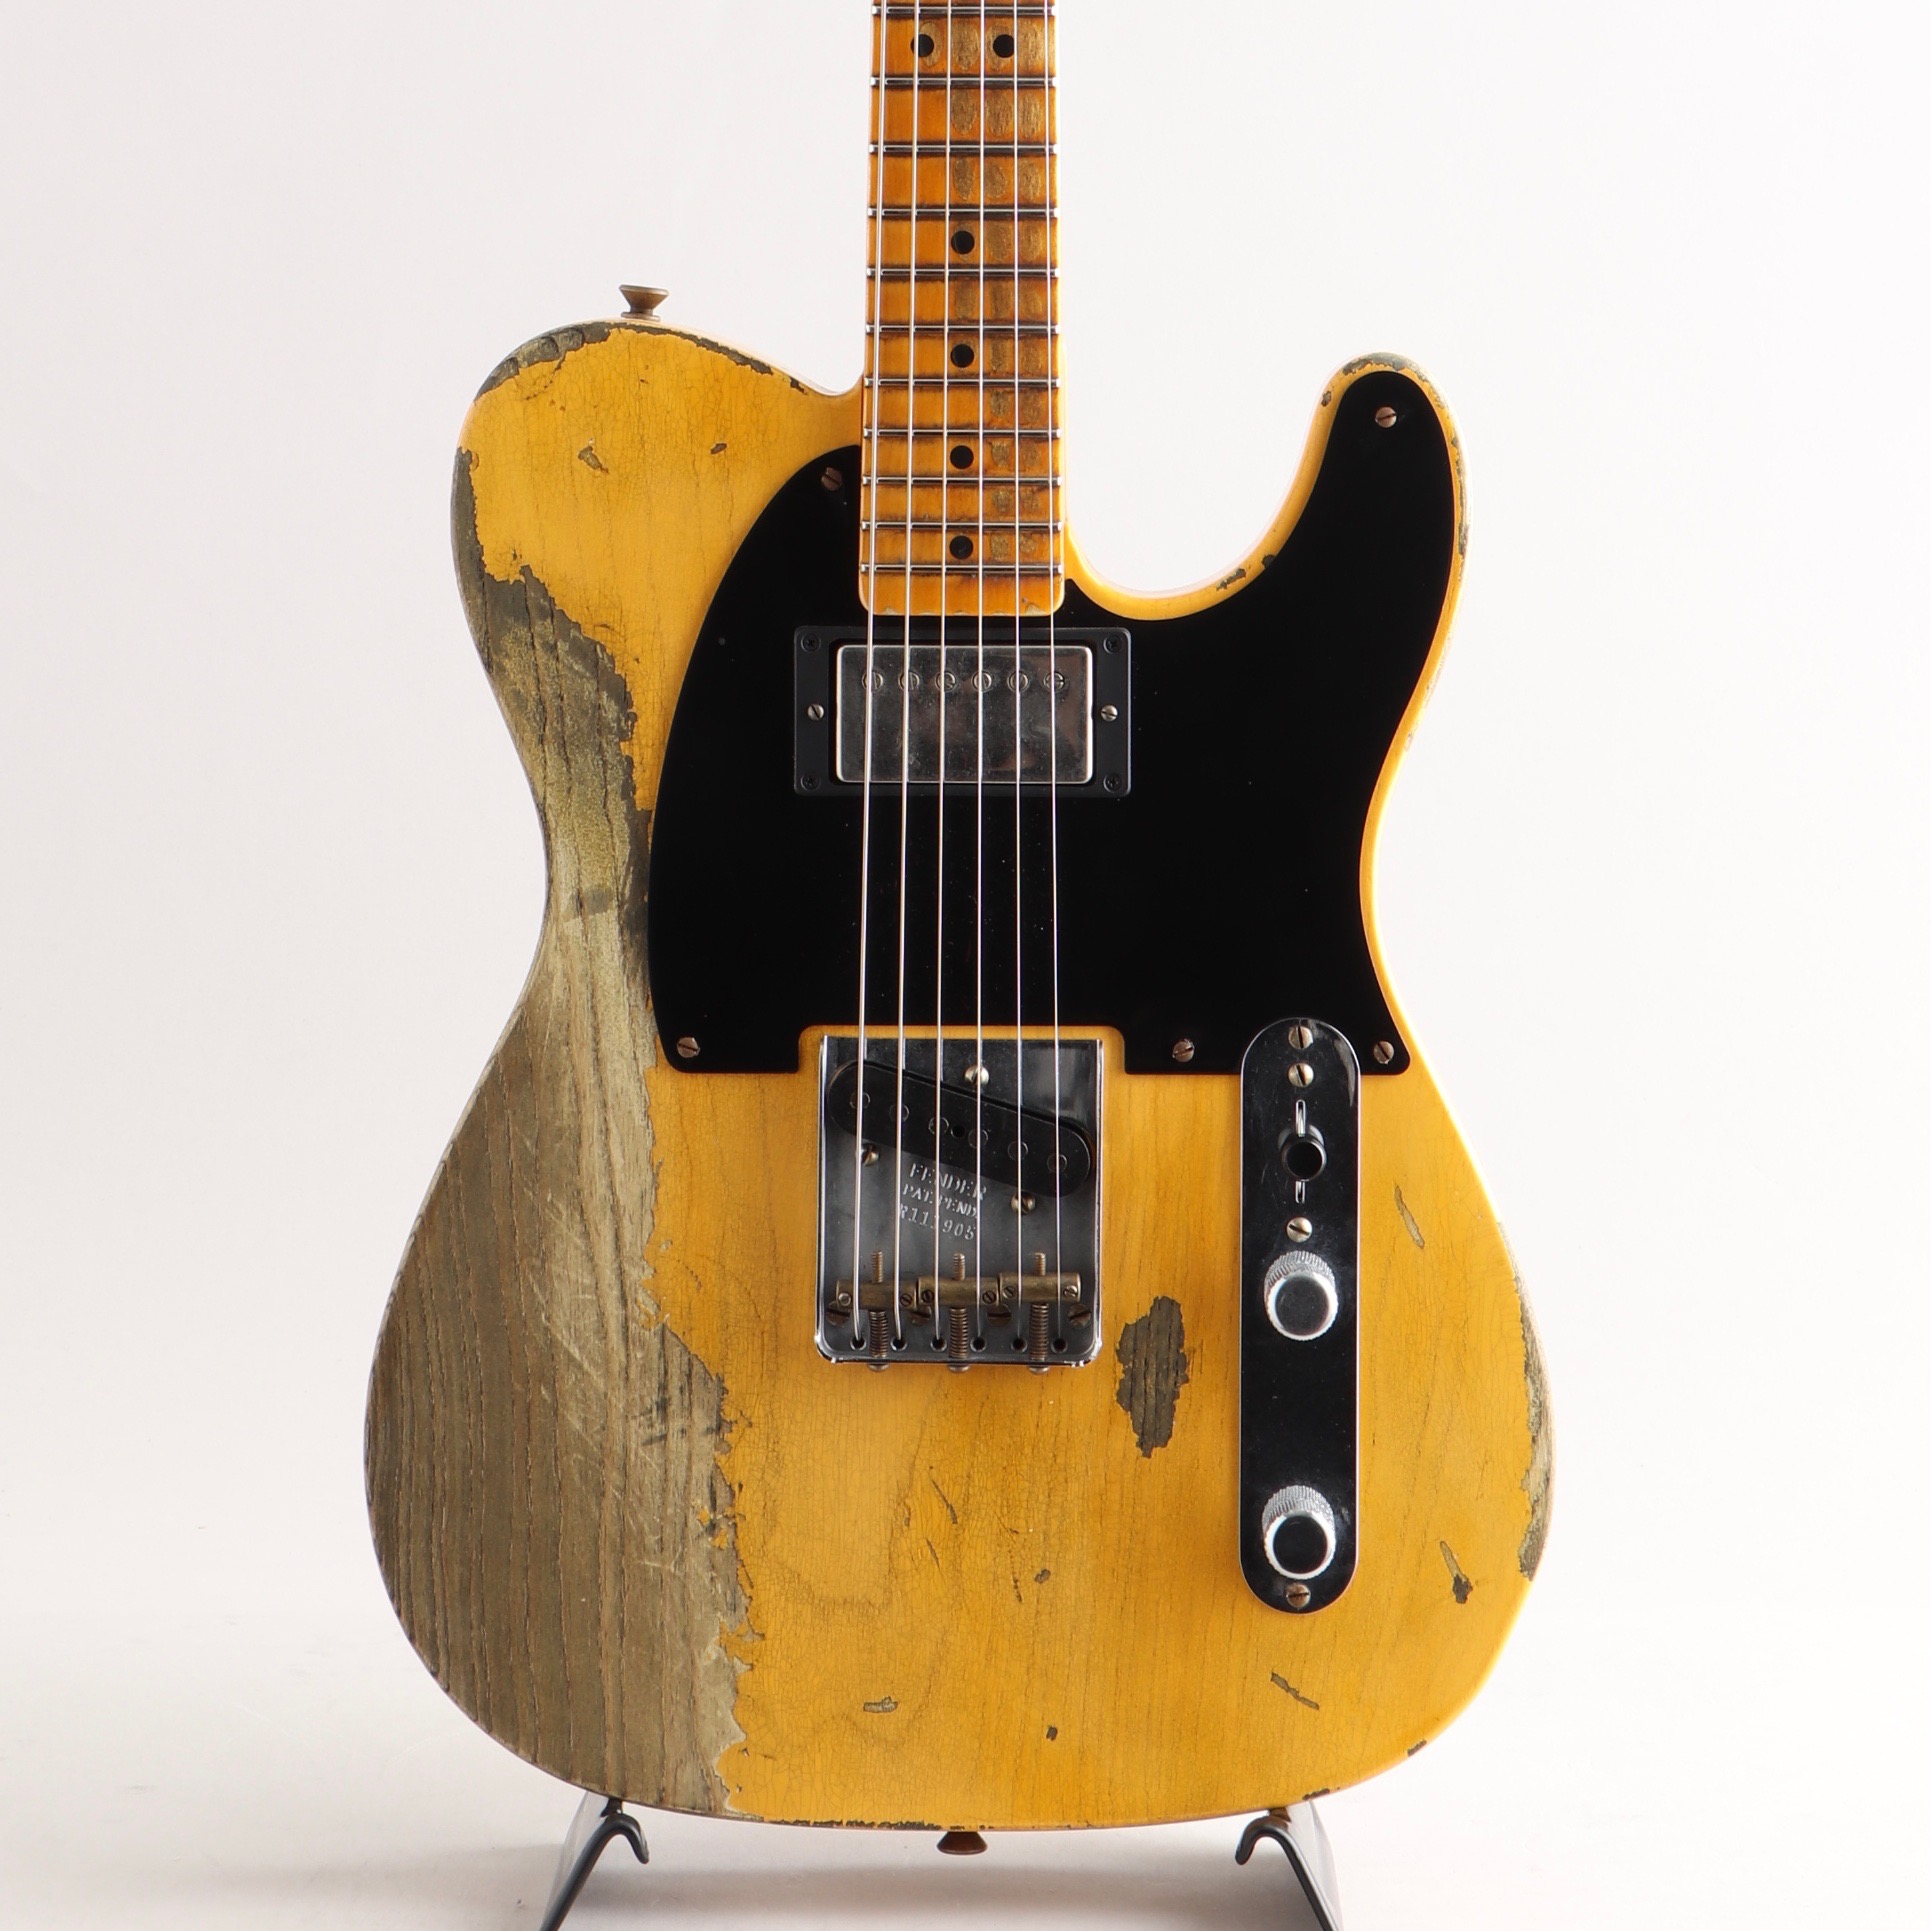 Limited 51 HS Telecaster Super Heavy Relic/Aged Nocaster Blonde【S/N:R111905】